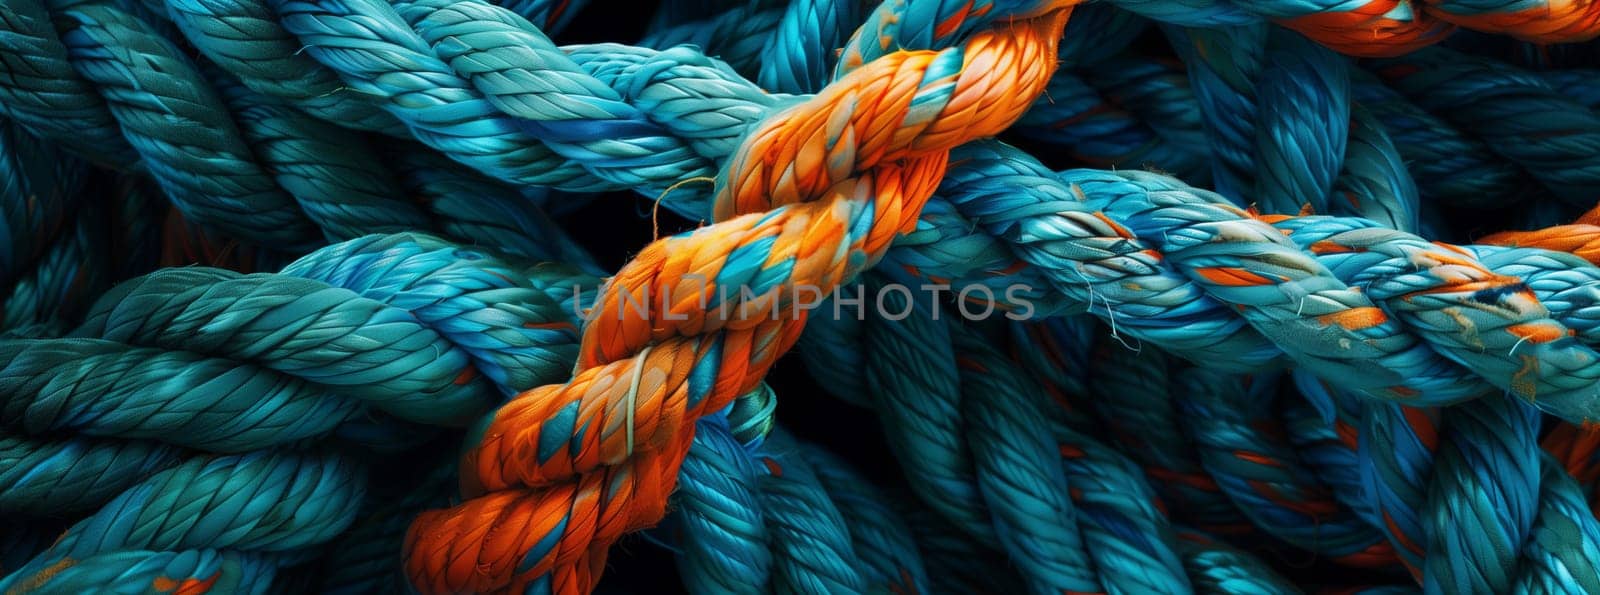 A close up of electric blue and orange woolen ropes creating a vibrant pattern. The ropes are intertwined, resembling a unique art piece or fiber net